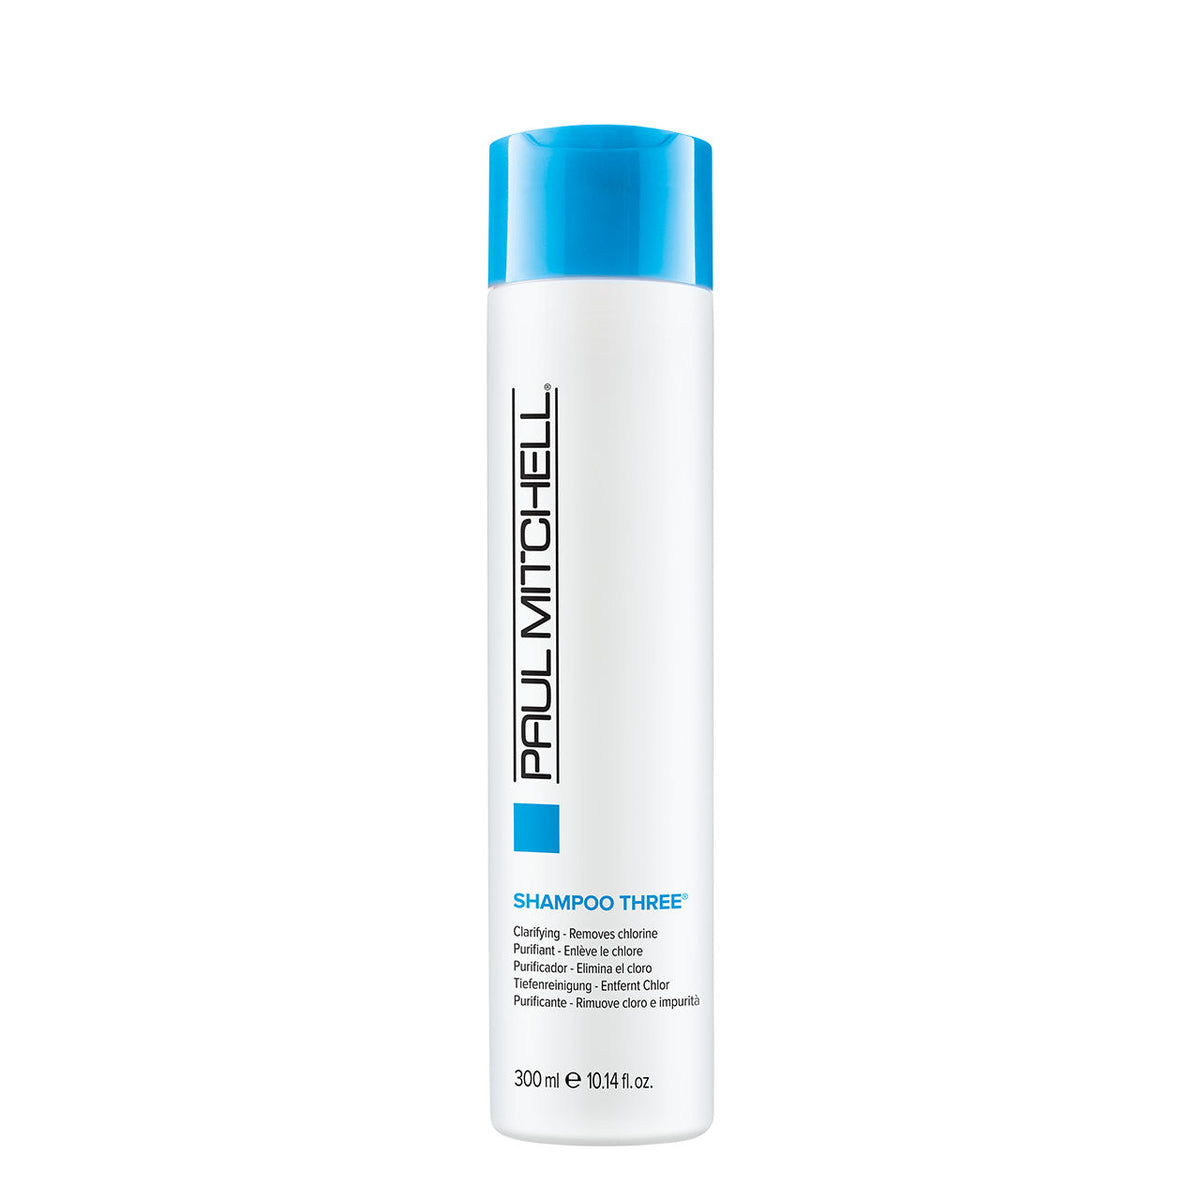 Clarifying Shampoo Three - 300ML - by Paul Mitchell |ProCare Outlet|